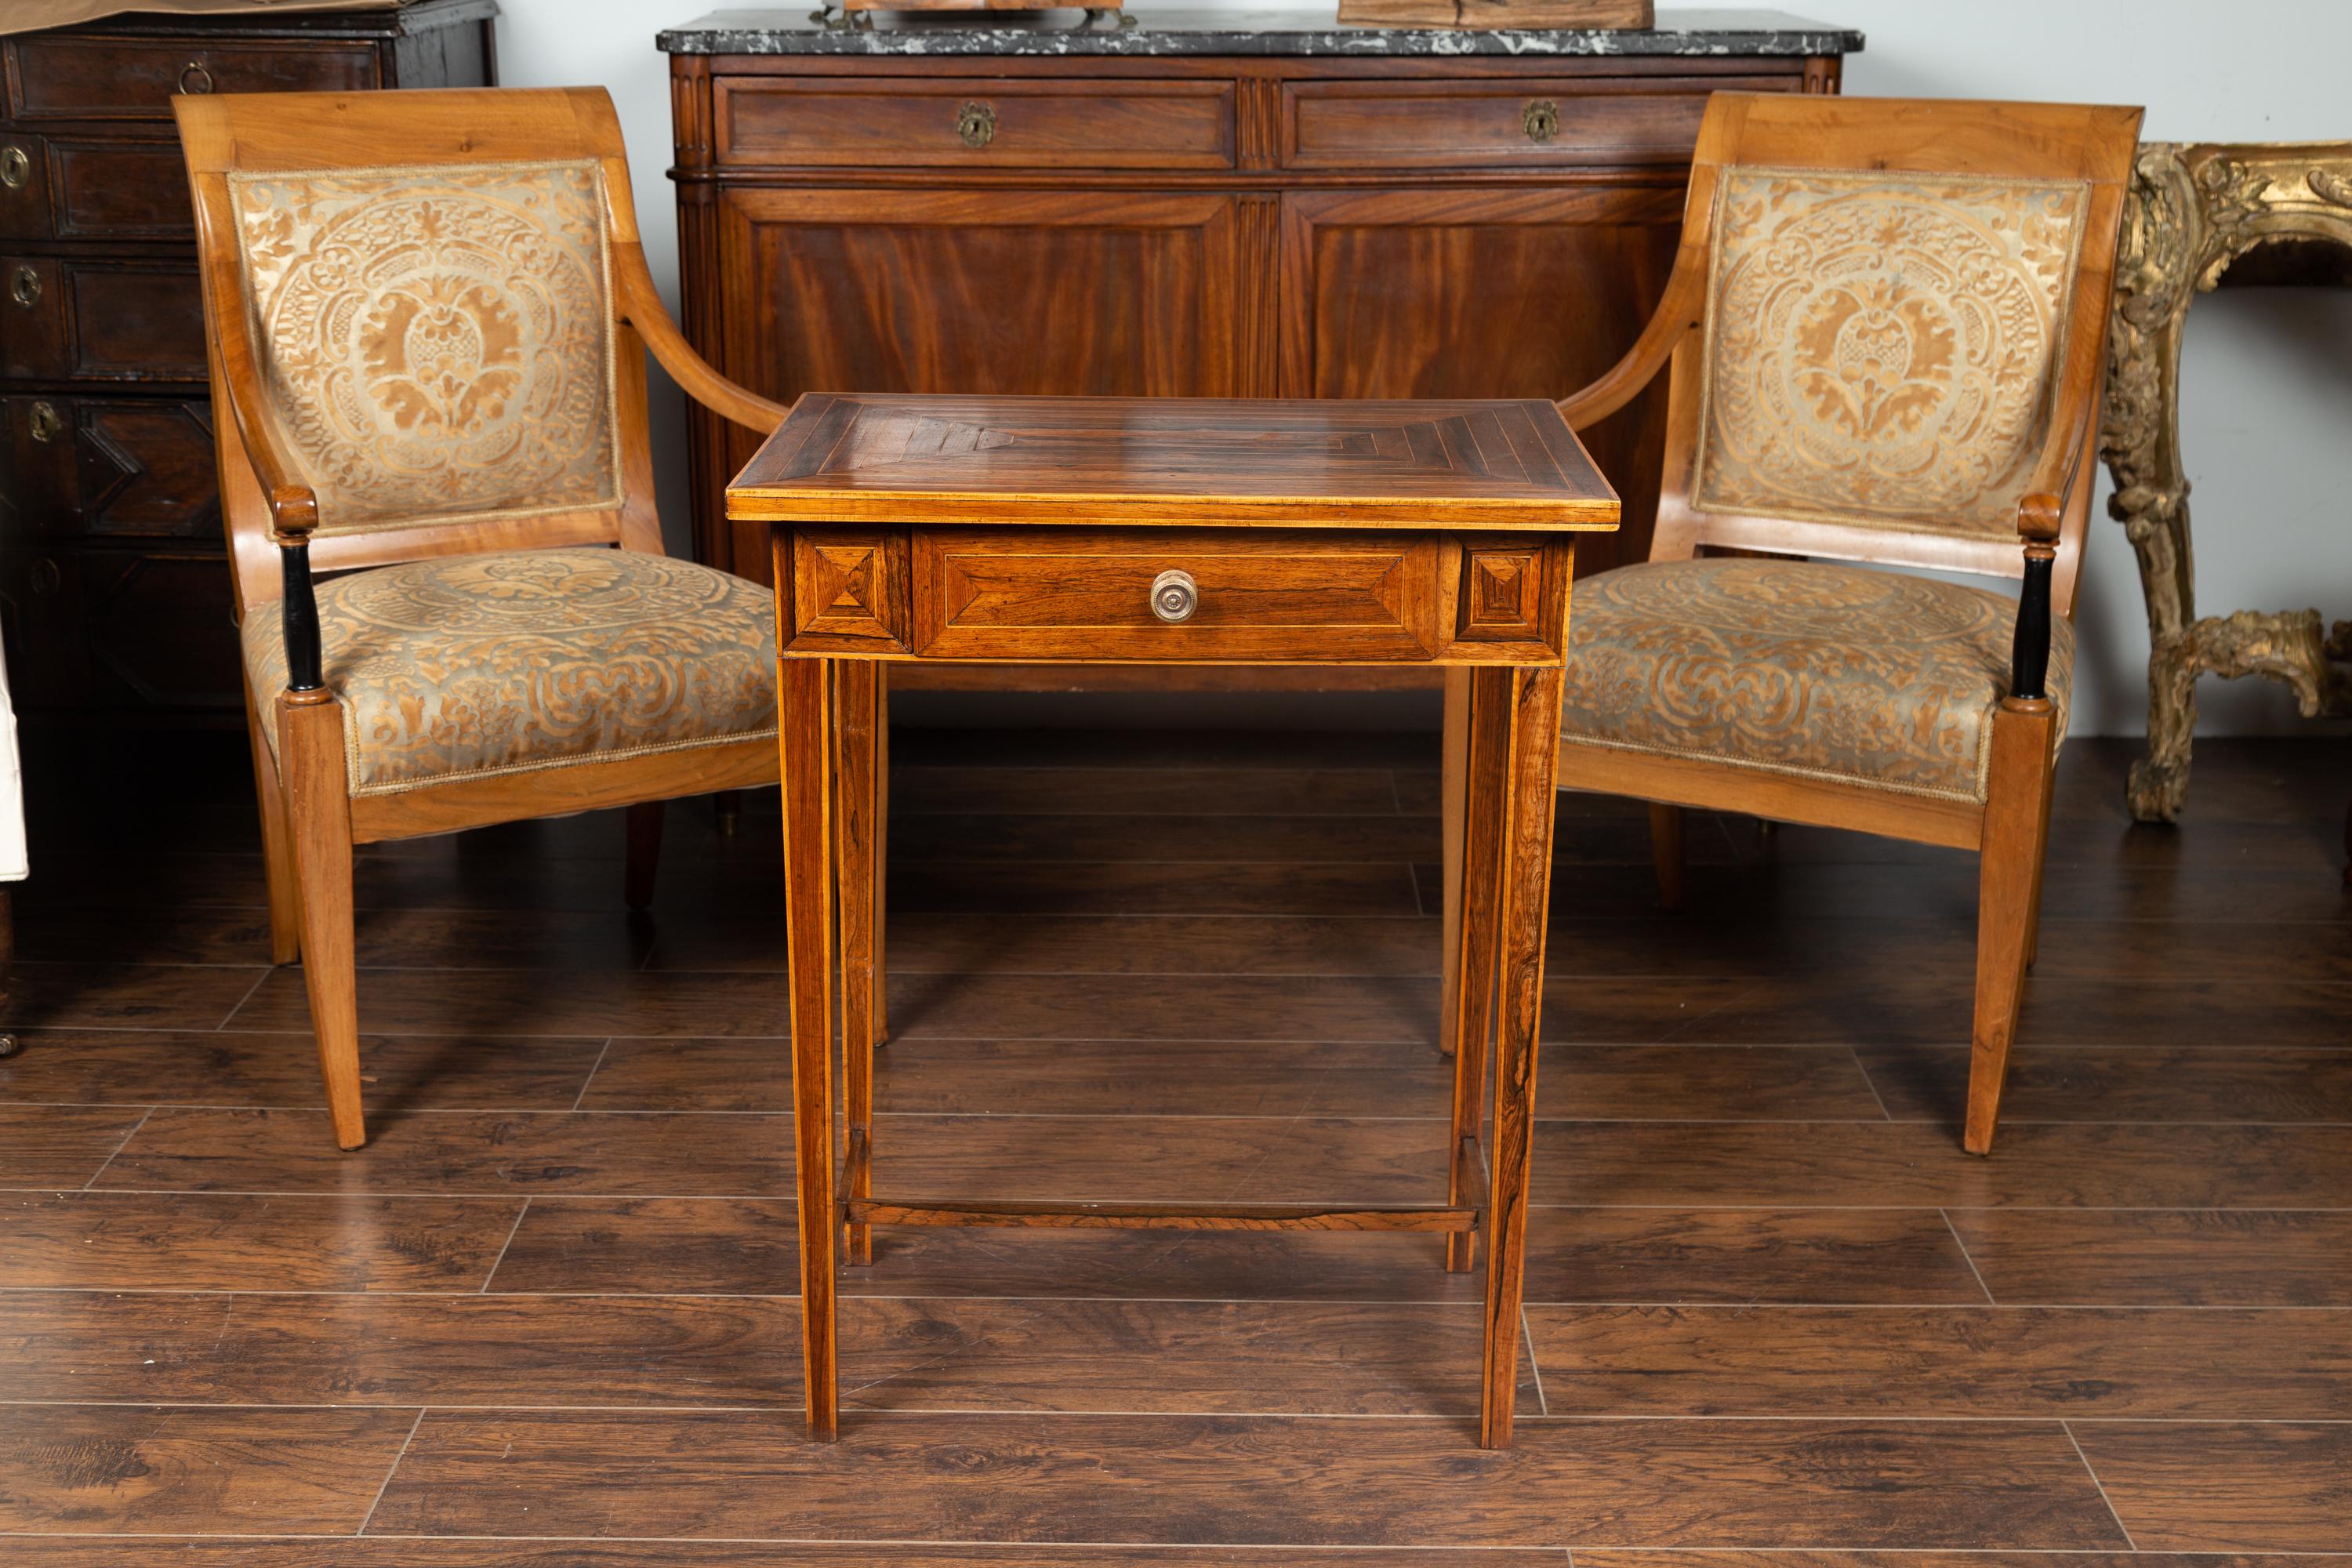 A French Napoleon III period walnut side table from the mid 19th century, with geometric inlay, single drawer and tapered legs. Born in France during the early years of emperor Napoleon III's reign, this side table features a rectangular top adorned